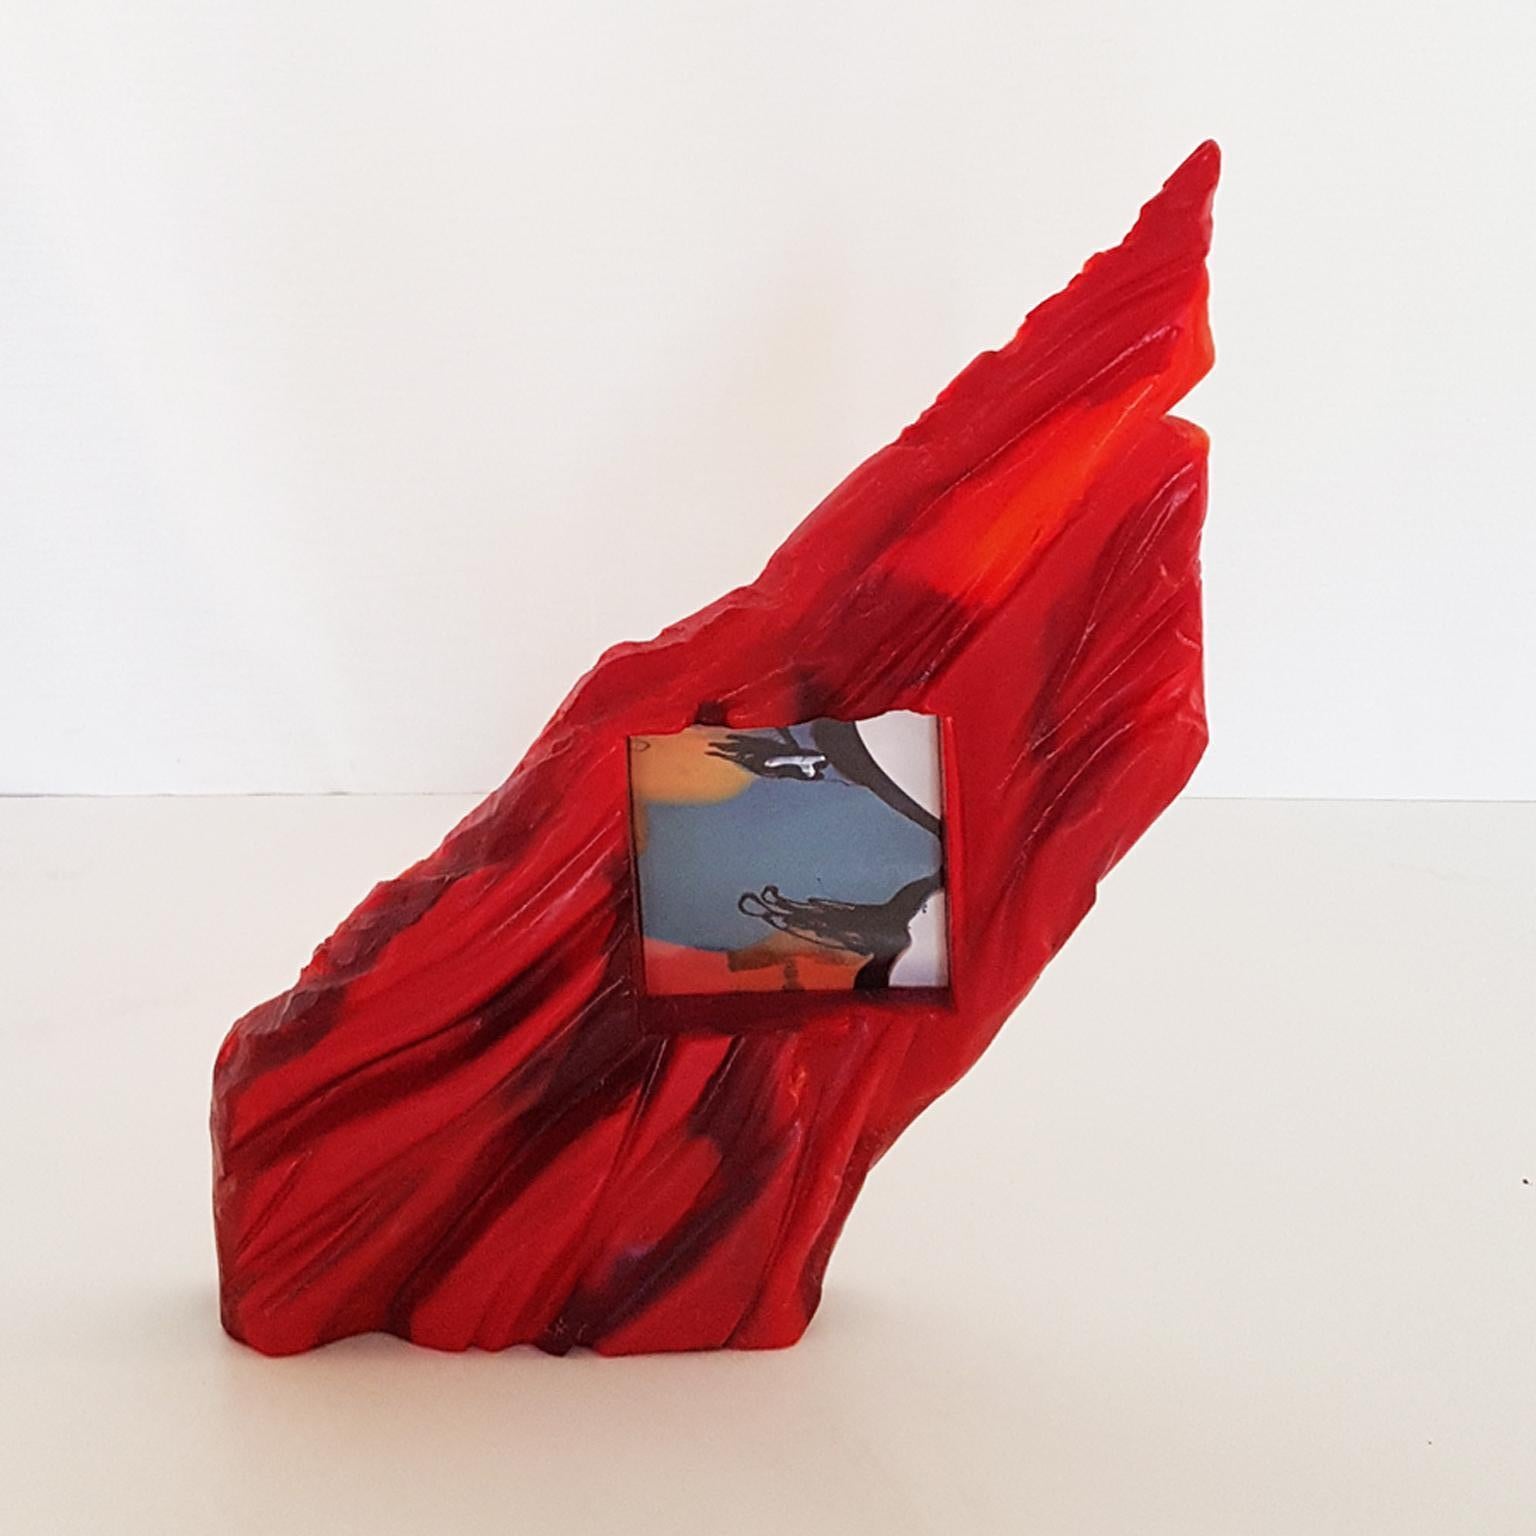 Gaetano Pesce Italian Contemporary Picture Frame in Red Resin, Limited Edition For Sale 9